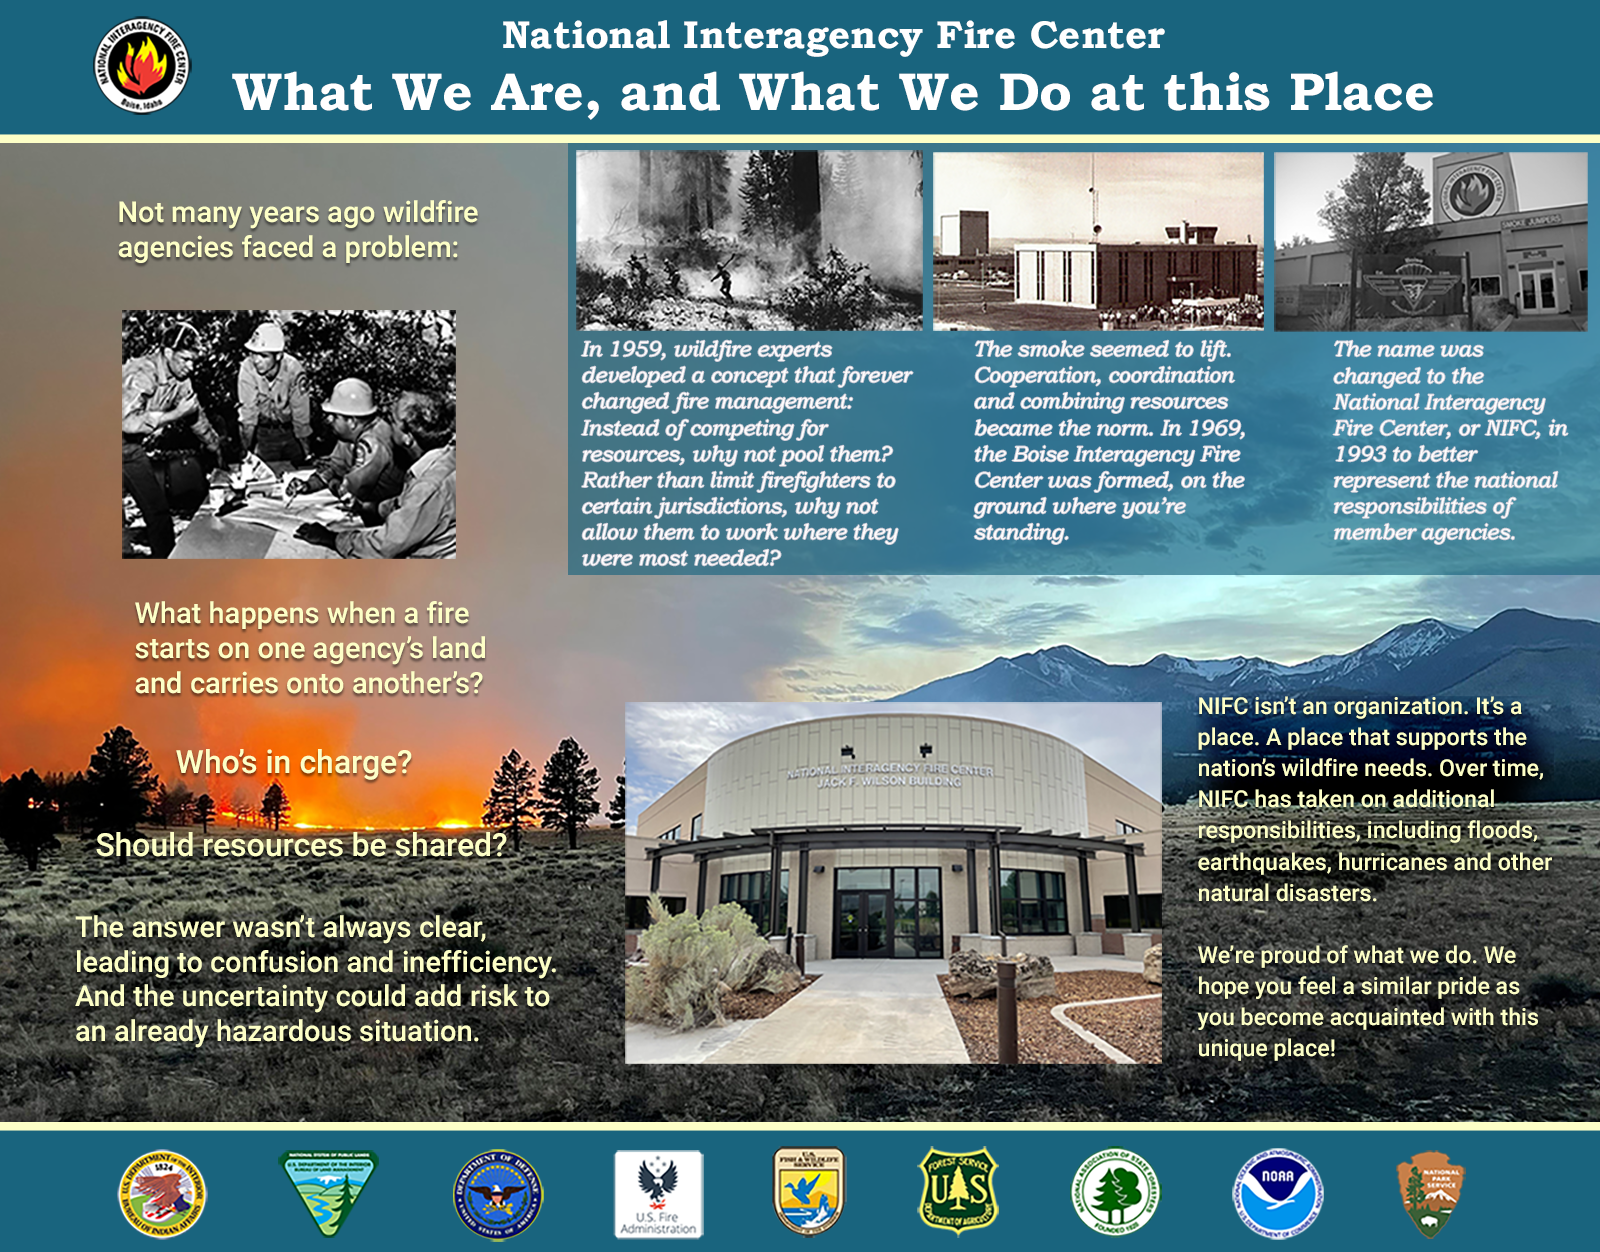 Interpretive Sign titled "National Interagency Fire Center (NIFC): What We Are, and What We Do at this Place"